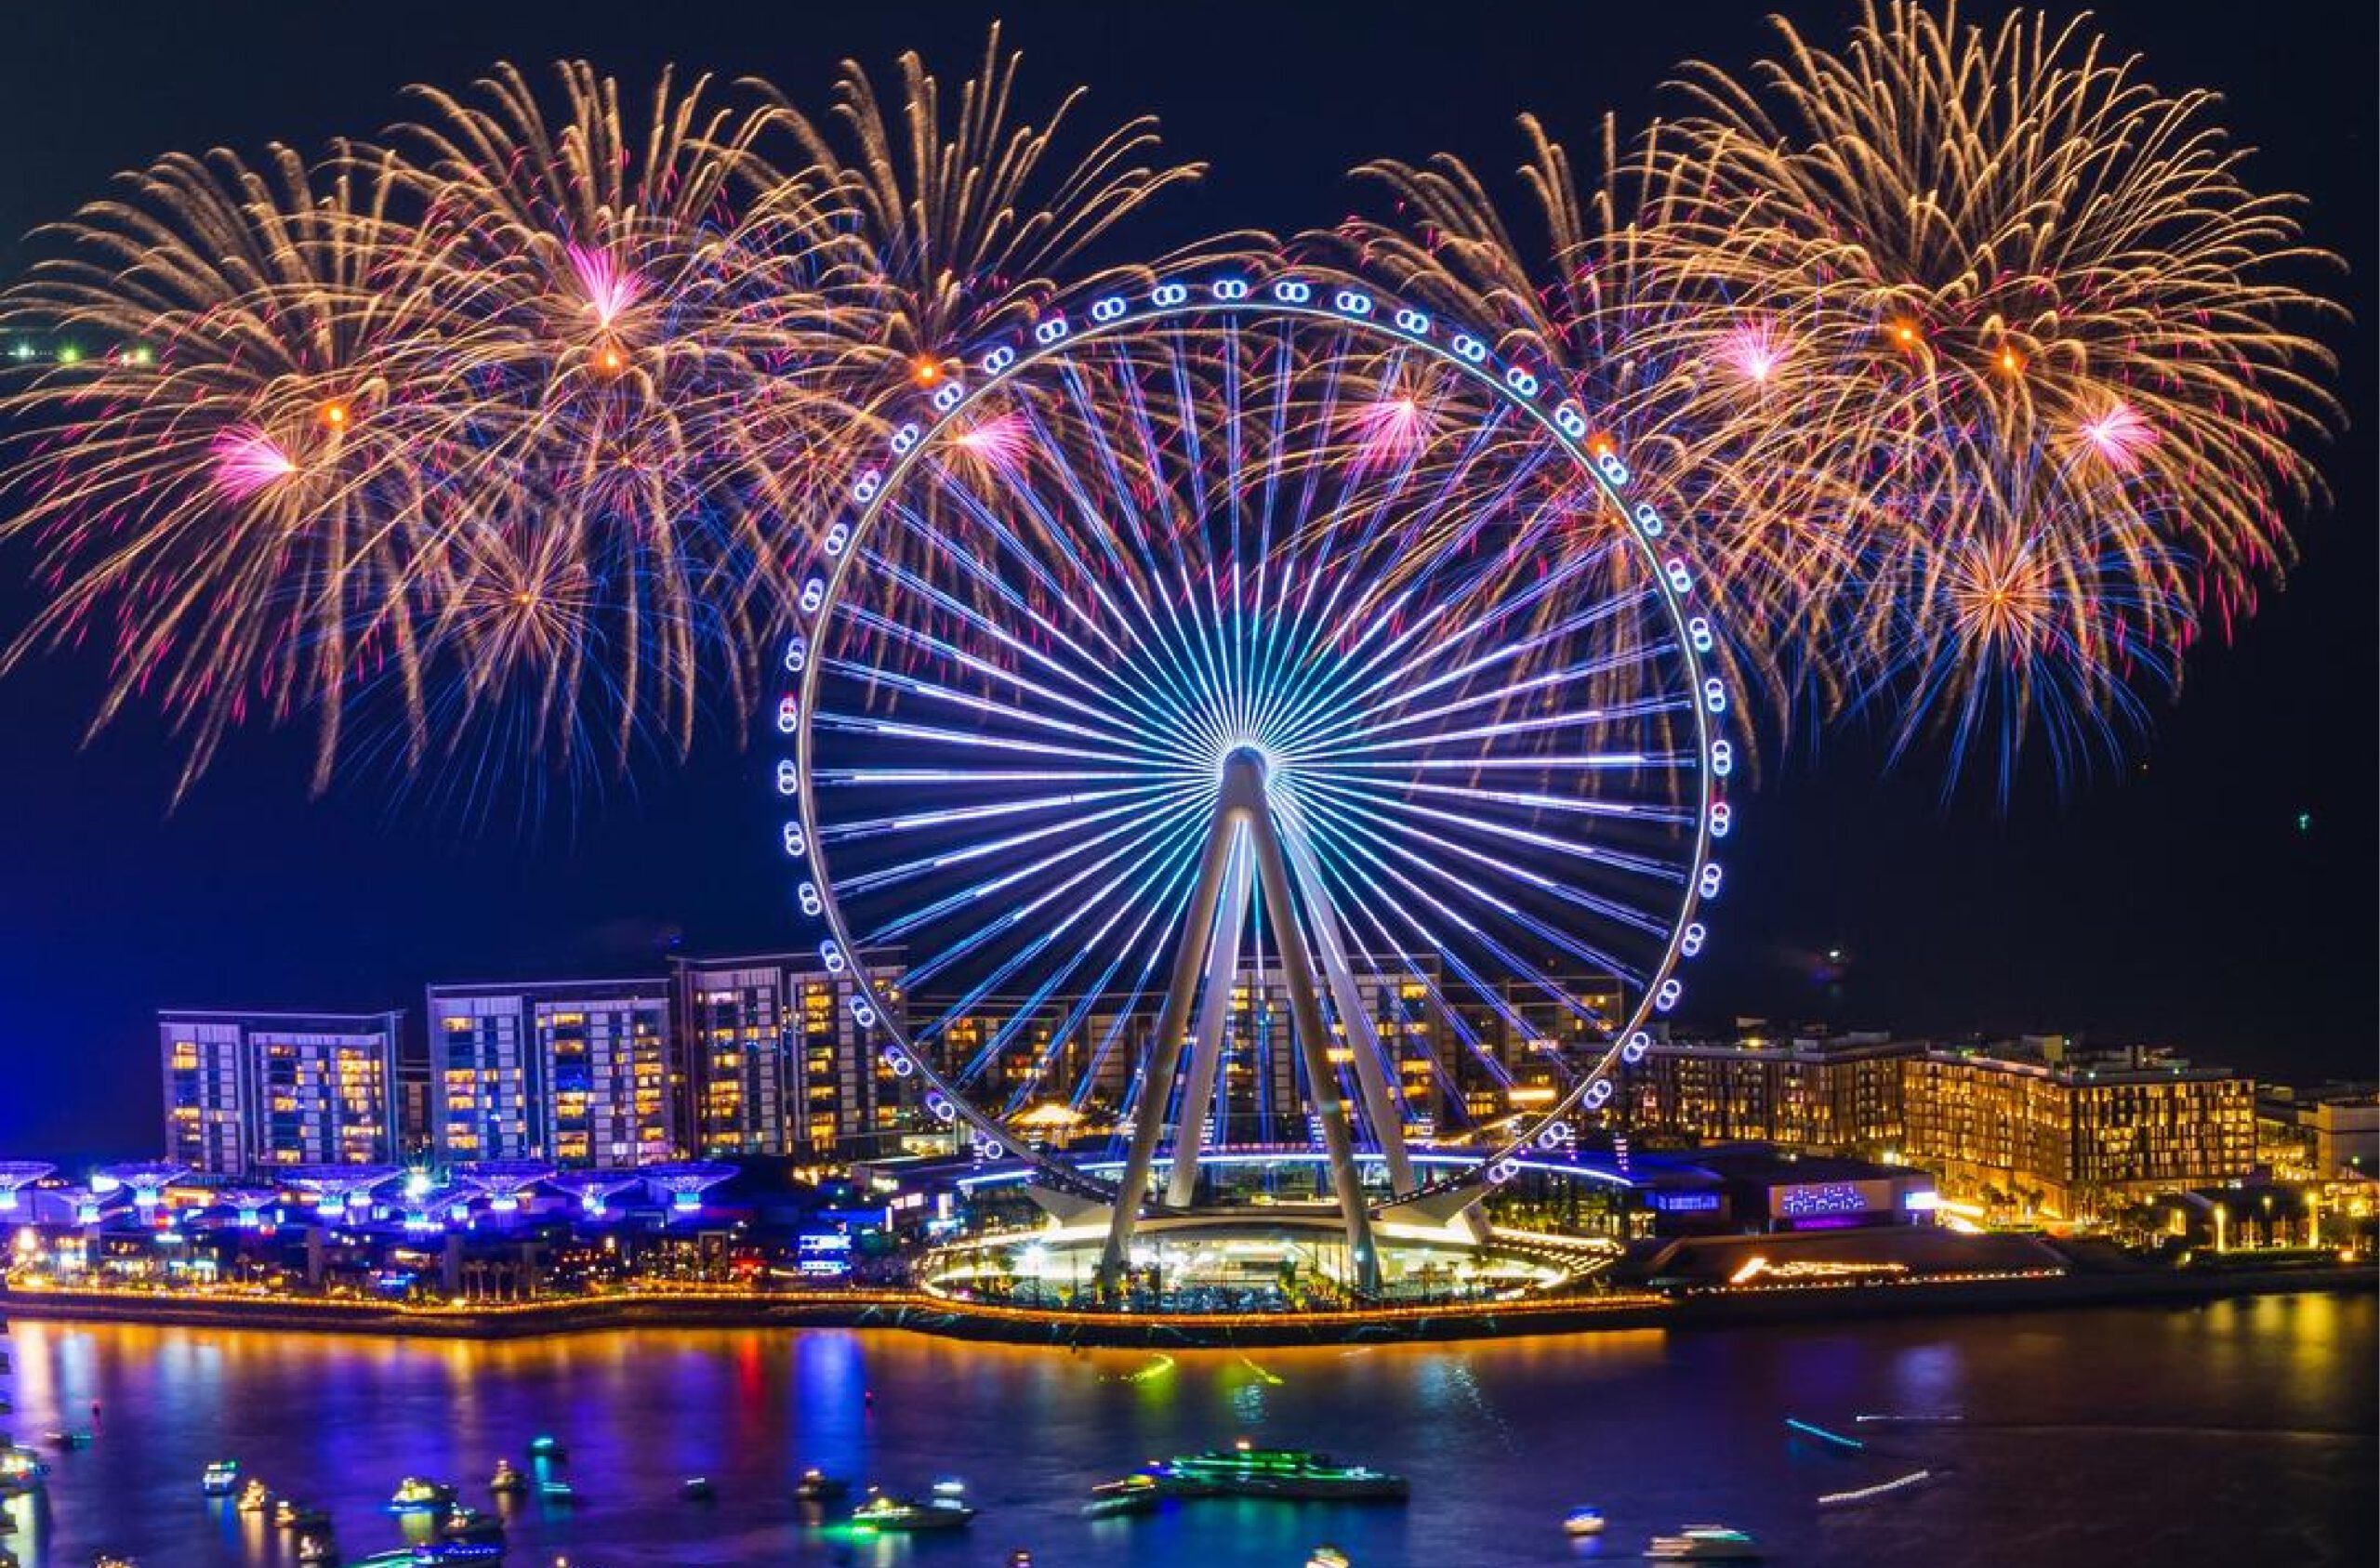 Ain Wheel Sparkling on New Year Fireworks